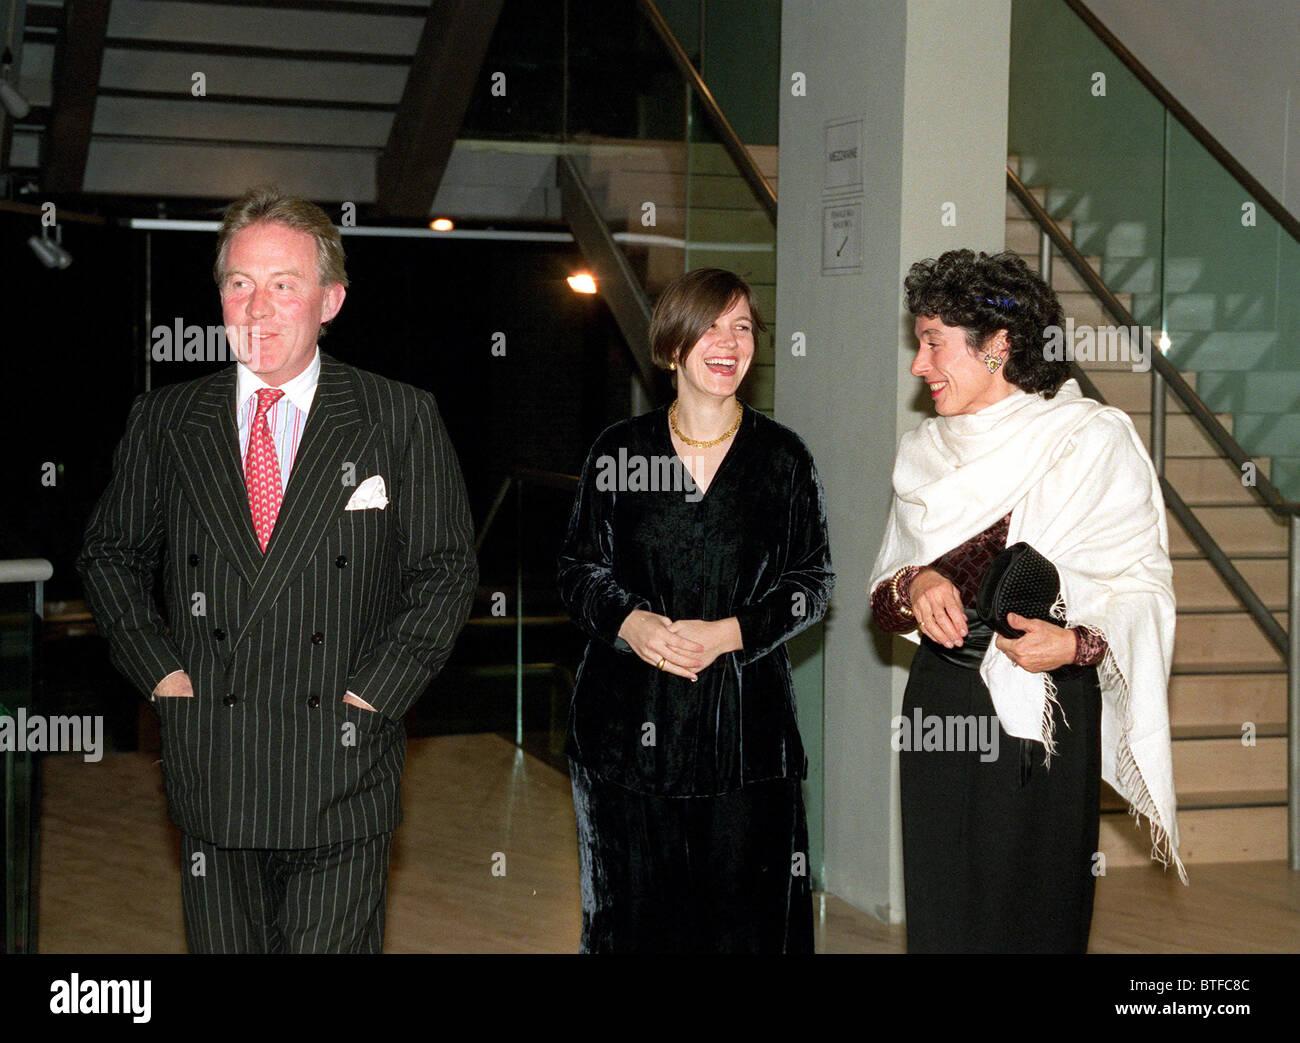 RODDY LLEWELLYN AND WIFE TANYA AT ROYAL BALLET PERFORMANCE AT NEW SADLER'S WELLS THEATRE, LONDON Stock Photo